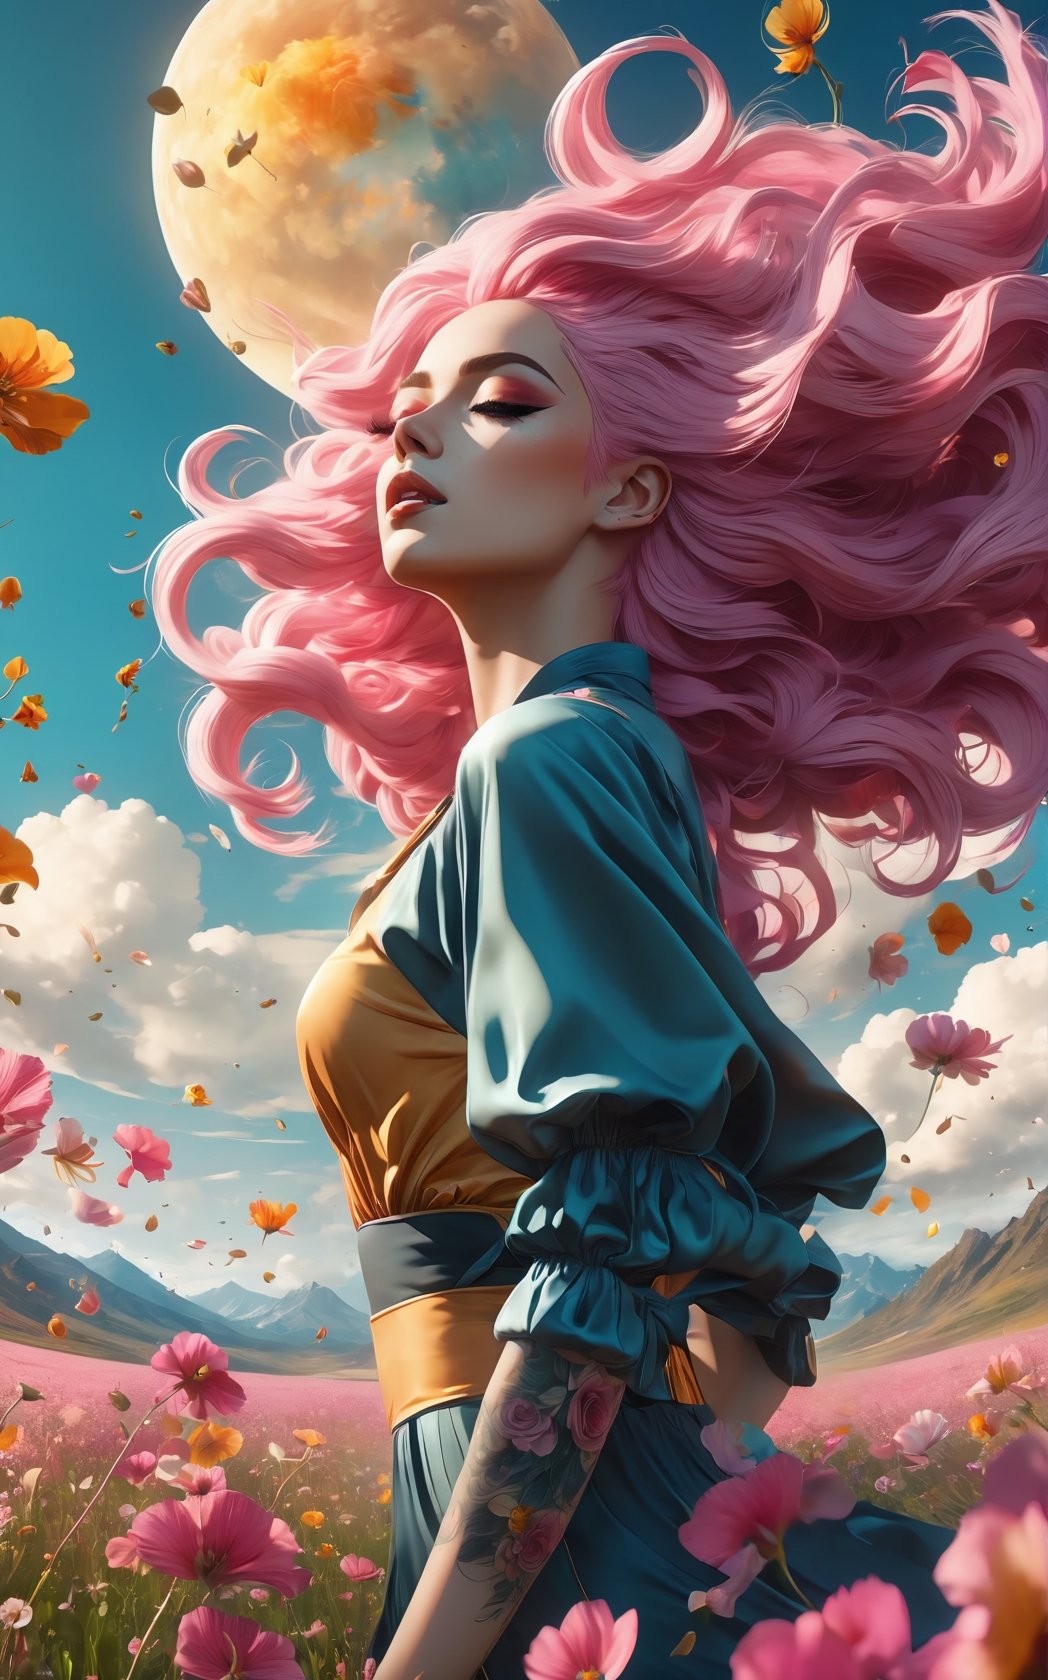  imagine a beautiful woman walking by a field if wild flowers with her body tattooed in intricate colorful floral design, long sapphire pink hair blowing with the wind,  sense of beauty and a wonder, sunset, 8k UHD, alberto seveso style,EpicSky,arcane, wide_hips, amber glow, flower petals flying with the wind, hazel eyes 